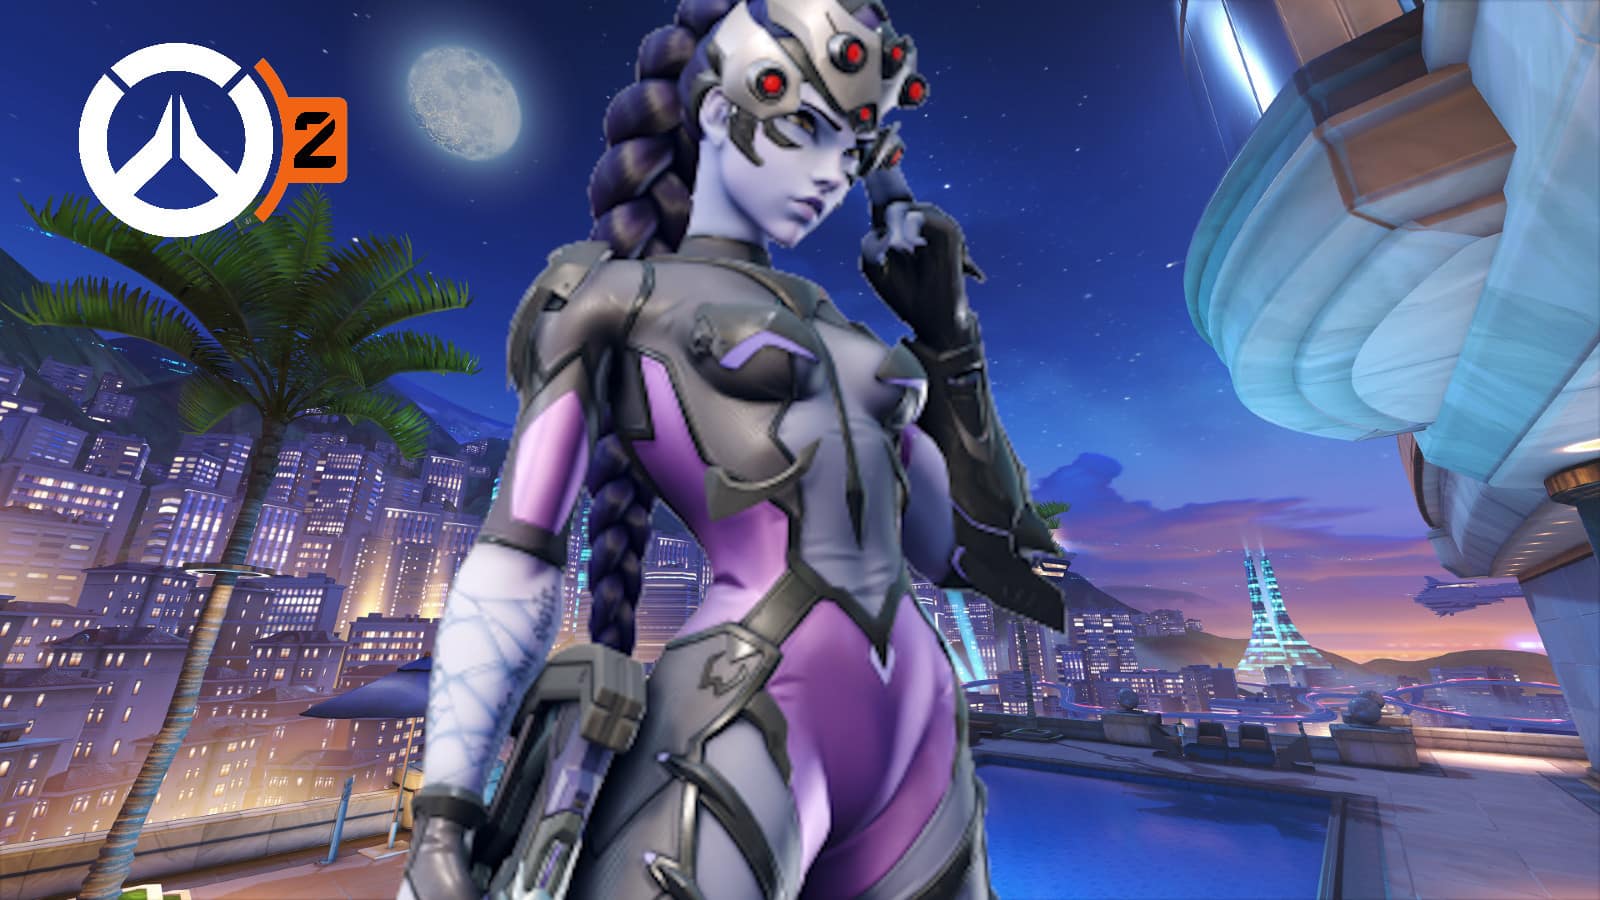 Overwatch 2 players want “oppressive” Widowmaker nerfed after 5v5